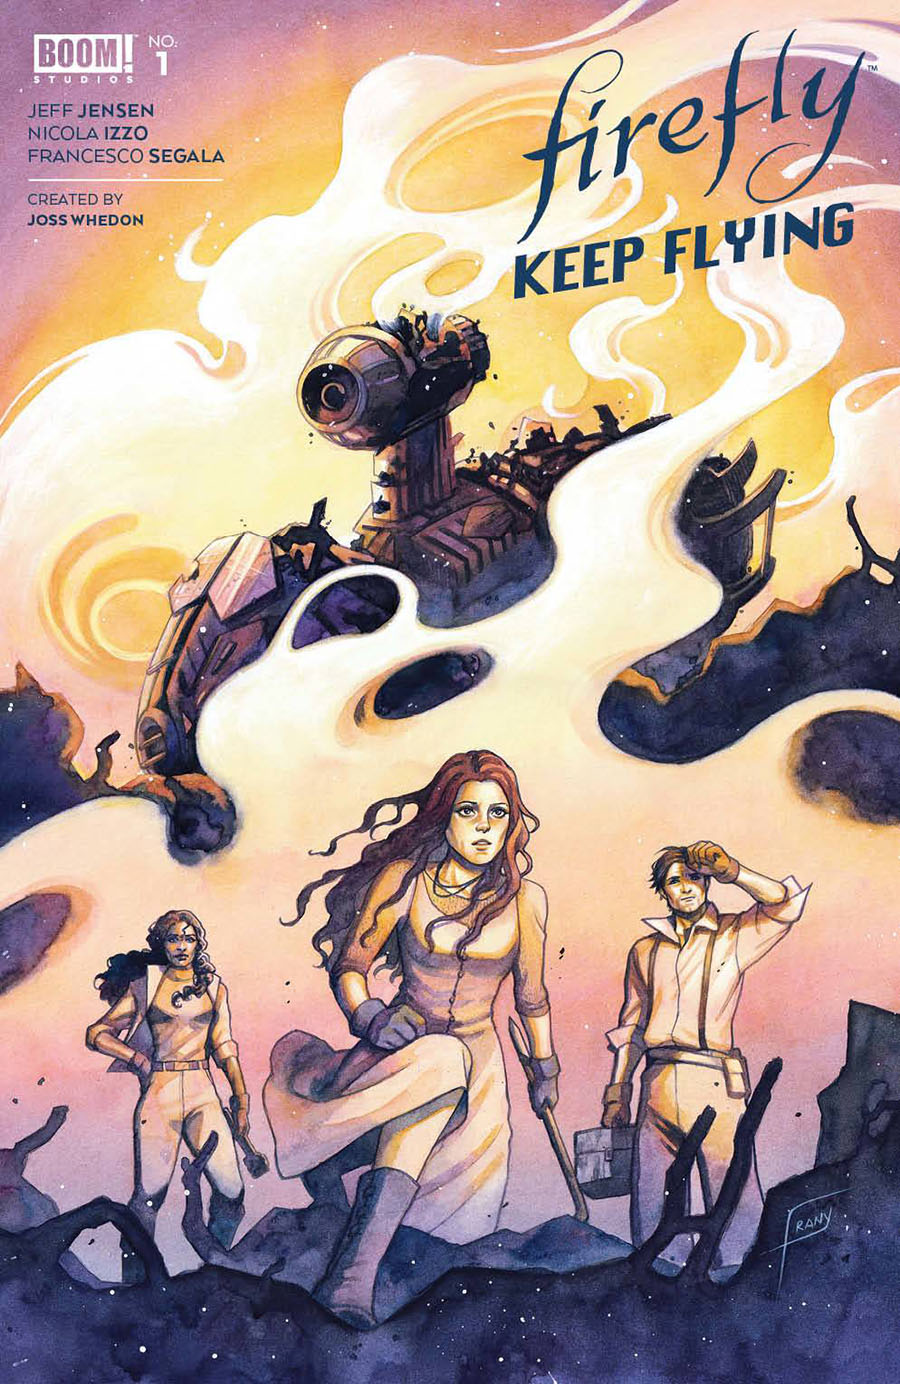 Firefly Keep Flying #1 (One Shot) Cover A Regular Frany Cover